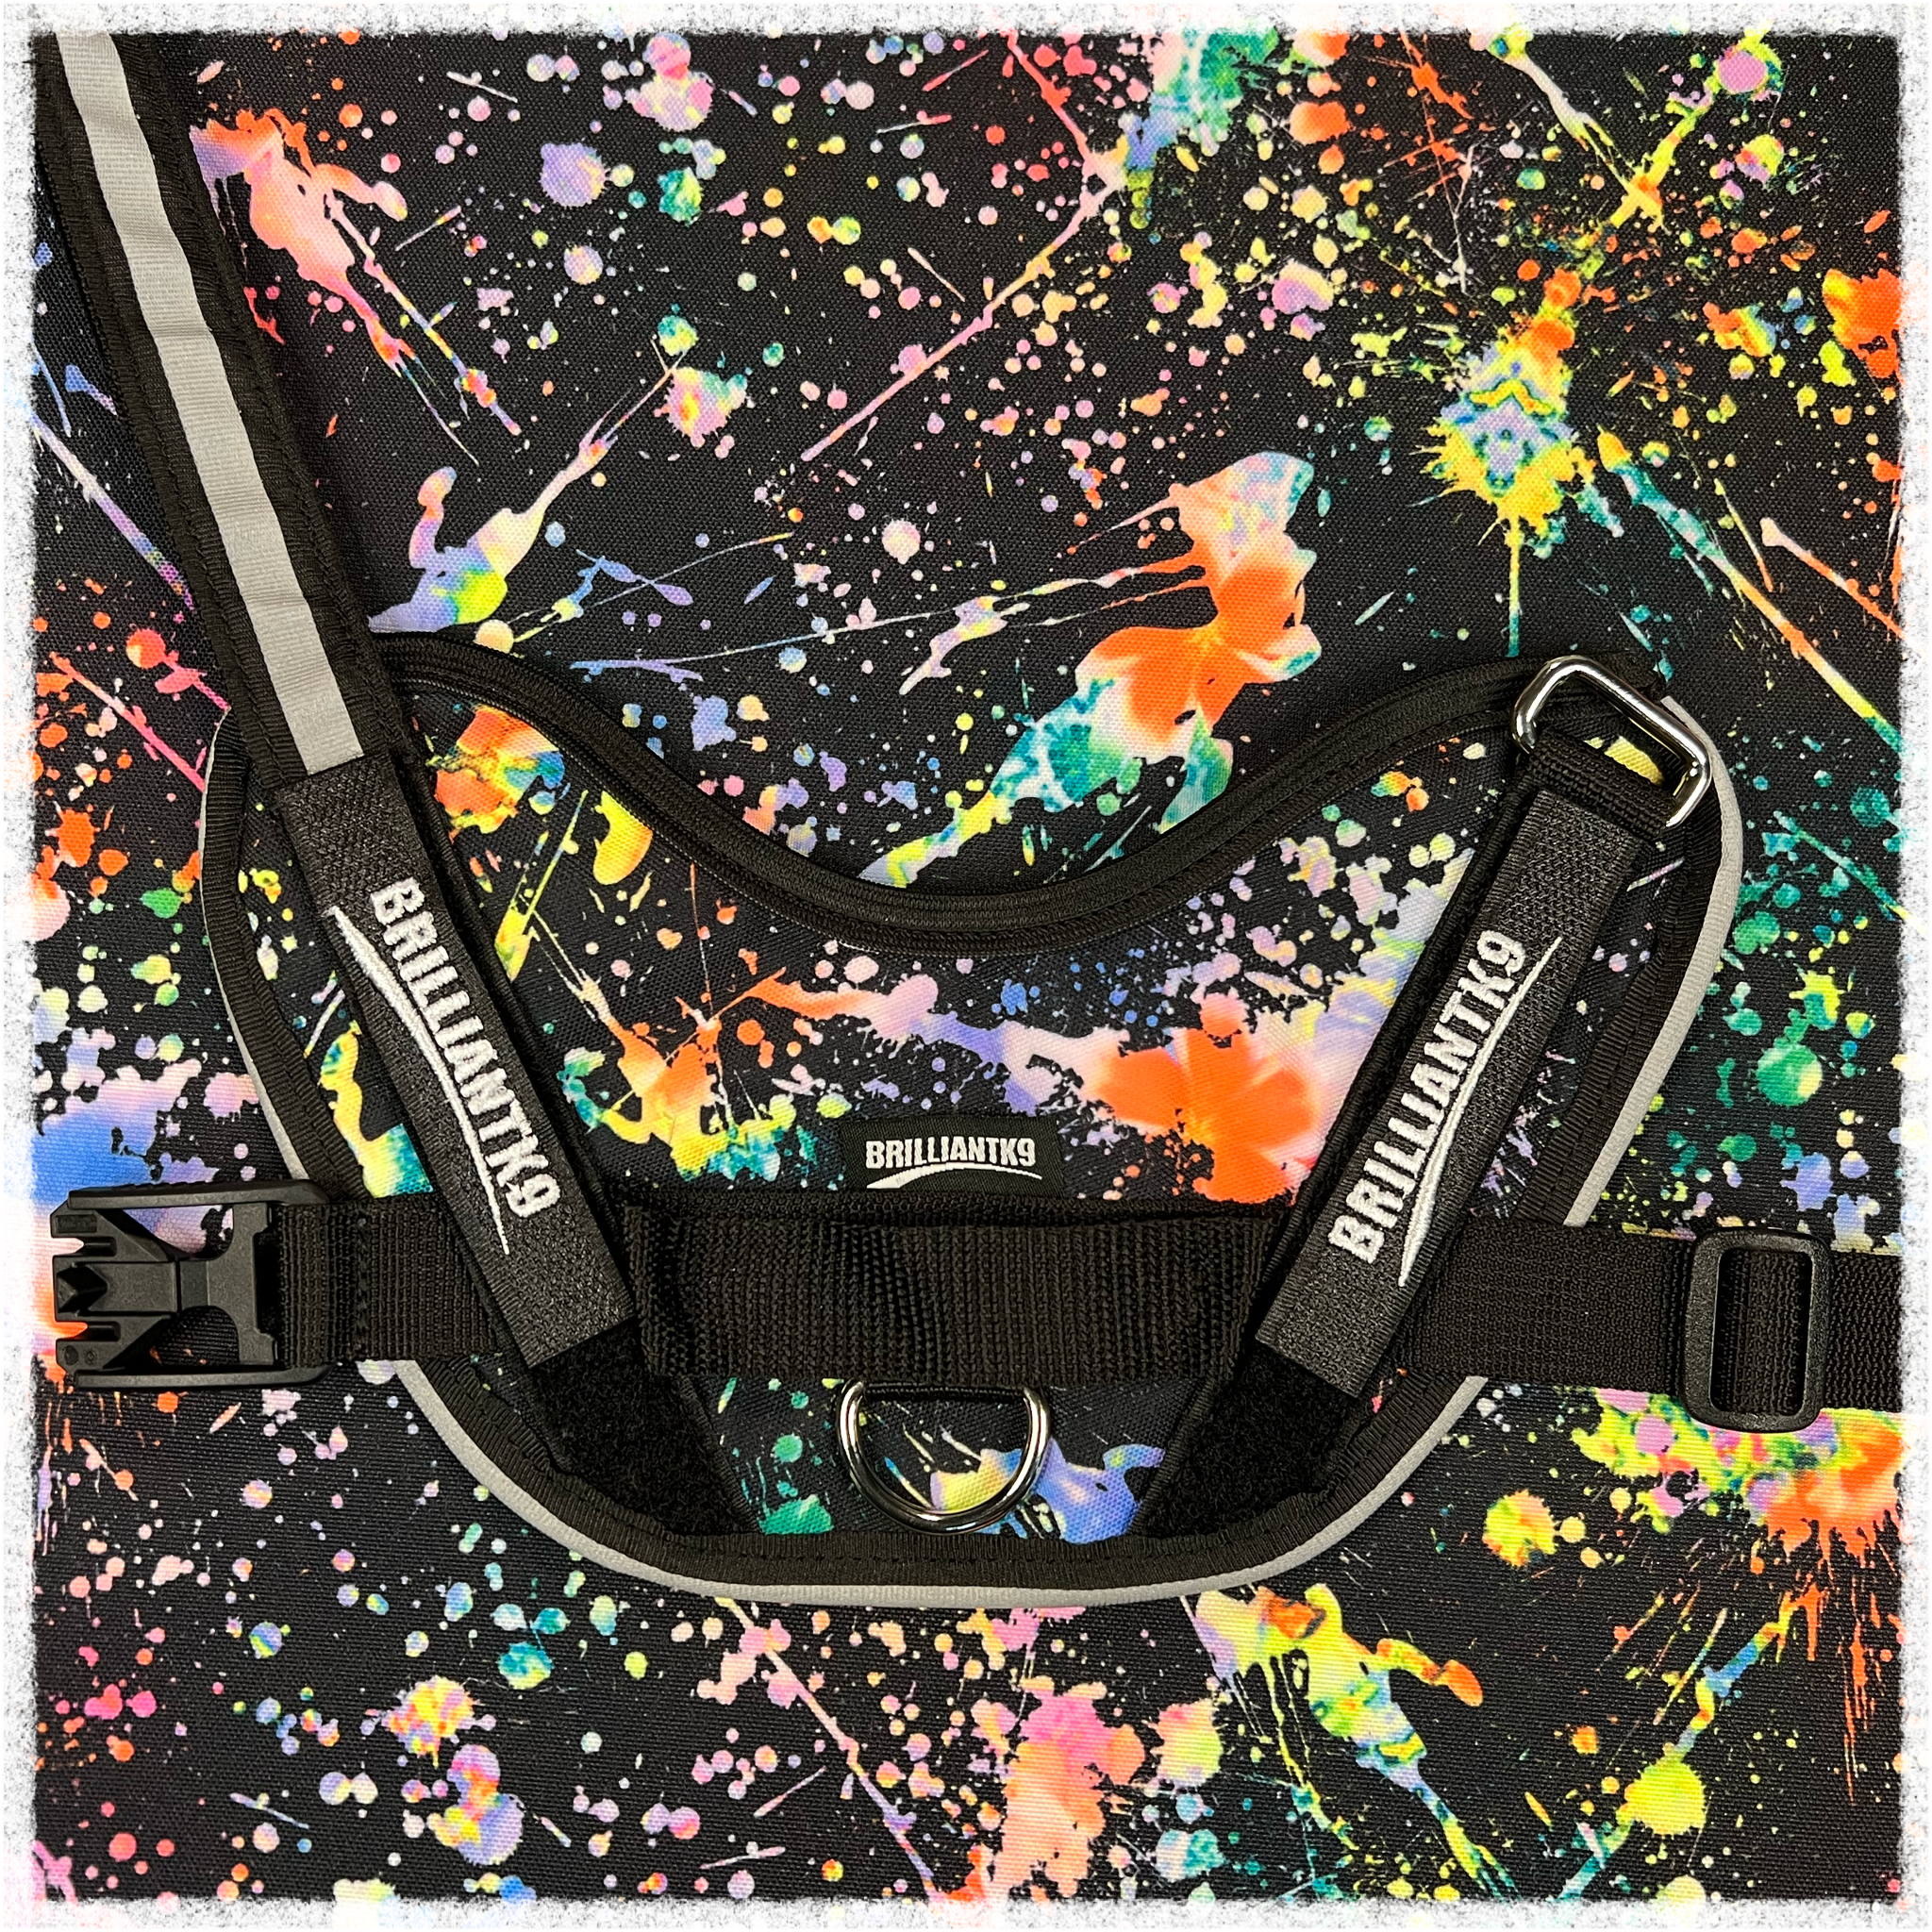 Oliver small breed harness in galactic splash